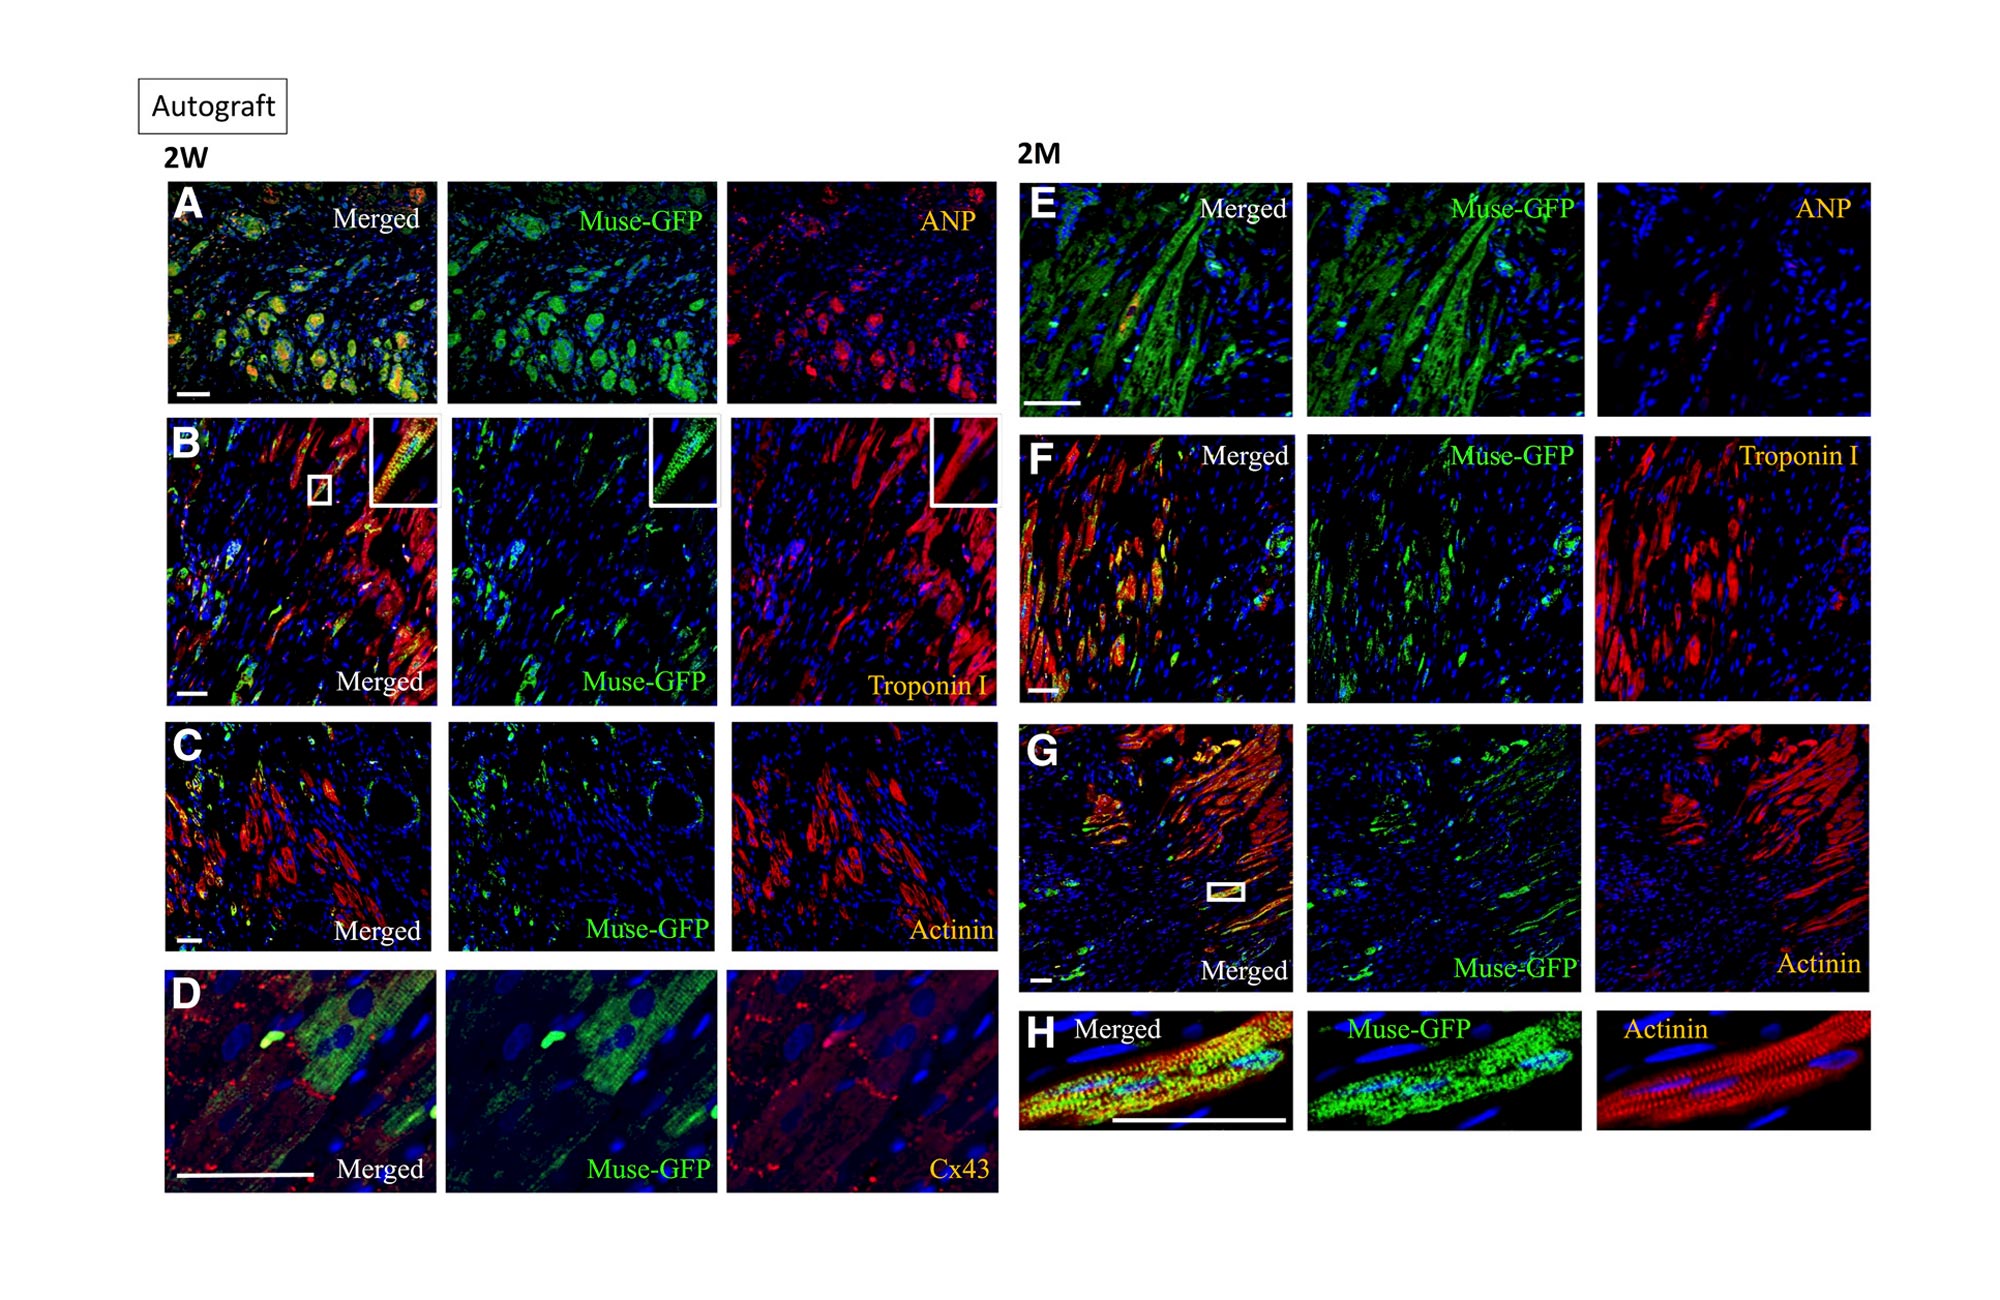 Figure 4. A–D, GFP-labelled autograft Muse cells engrafted into the infarcted myocardial region expressed cardiac markers ANP, troponin I and α-actinin (2 weeks after AMI). GFP-labelled Muse cells also expressed connexin-43 between themselves and host cardiomyocytes (2 weeks after AMI). E–H, GFP-labelled autograft Muse cells engrafted into the infarct myocardial region expressed cardiac markers ANP, troponin I and α-actinin (2 months after AMI). AMI, acute myocardial infarction; ANP, atrial natriuretic peptide; GFP, green fluorescent protein. [Reproduced from Ref. 19]